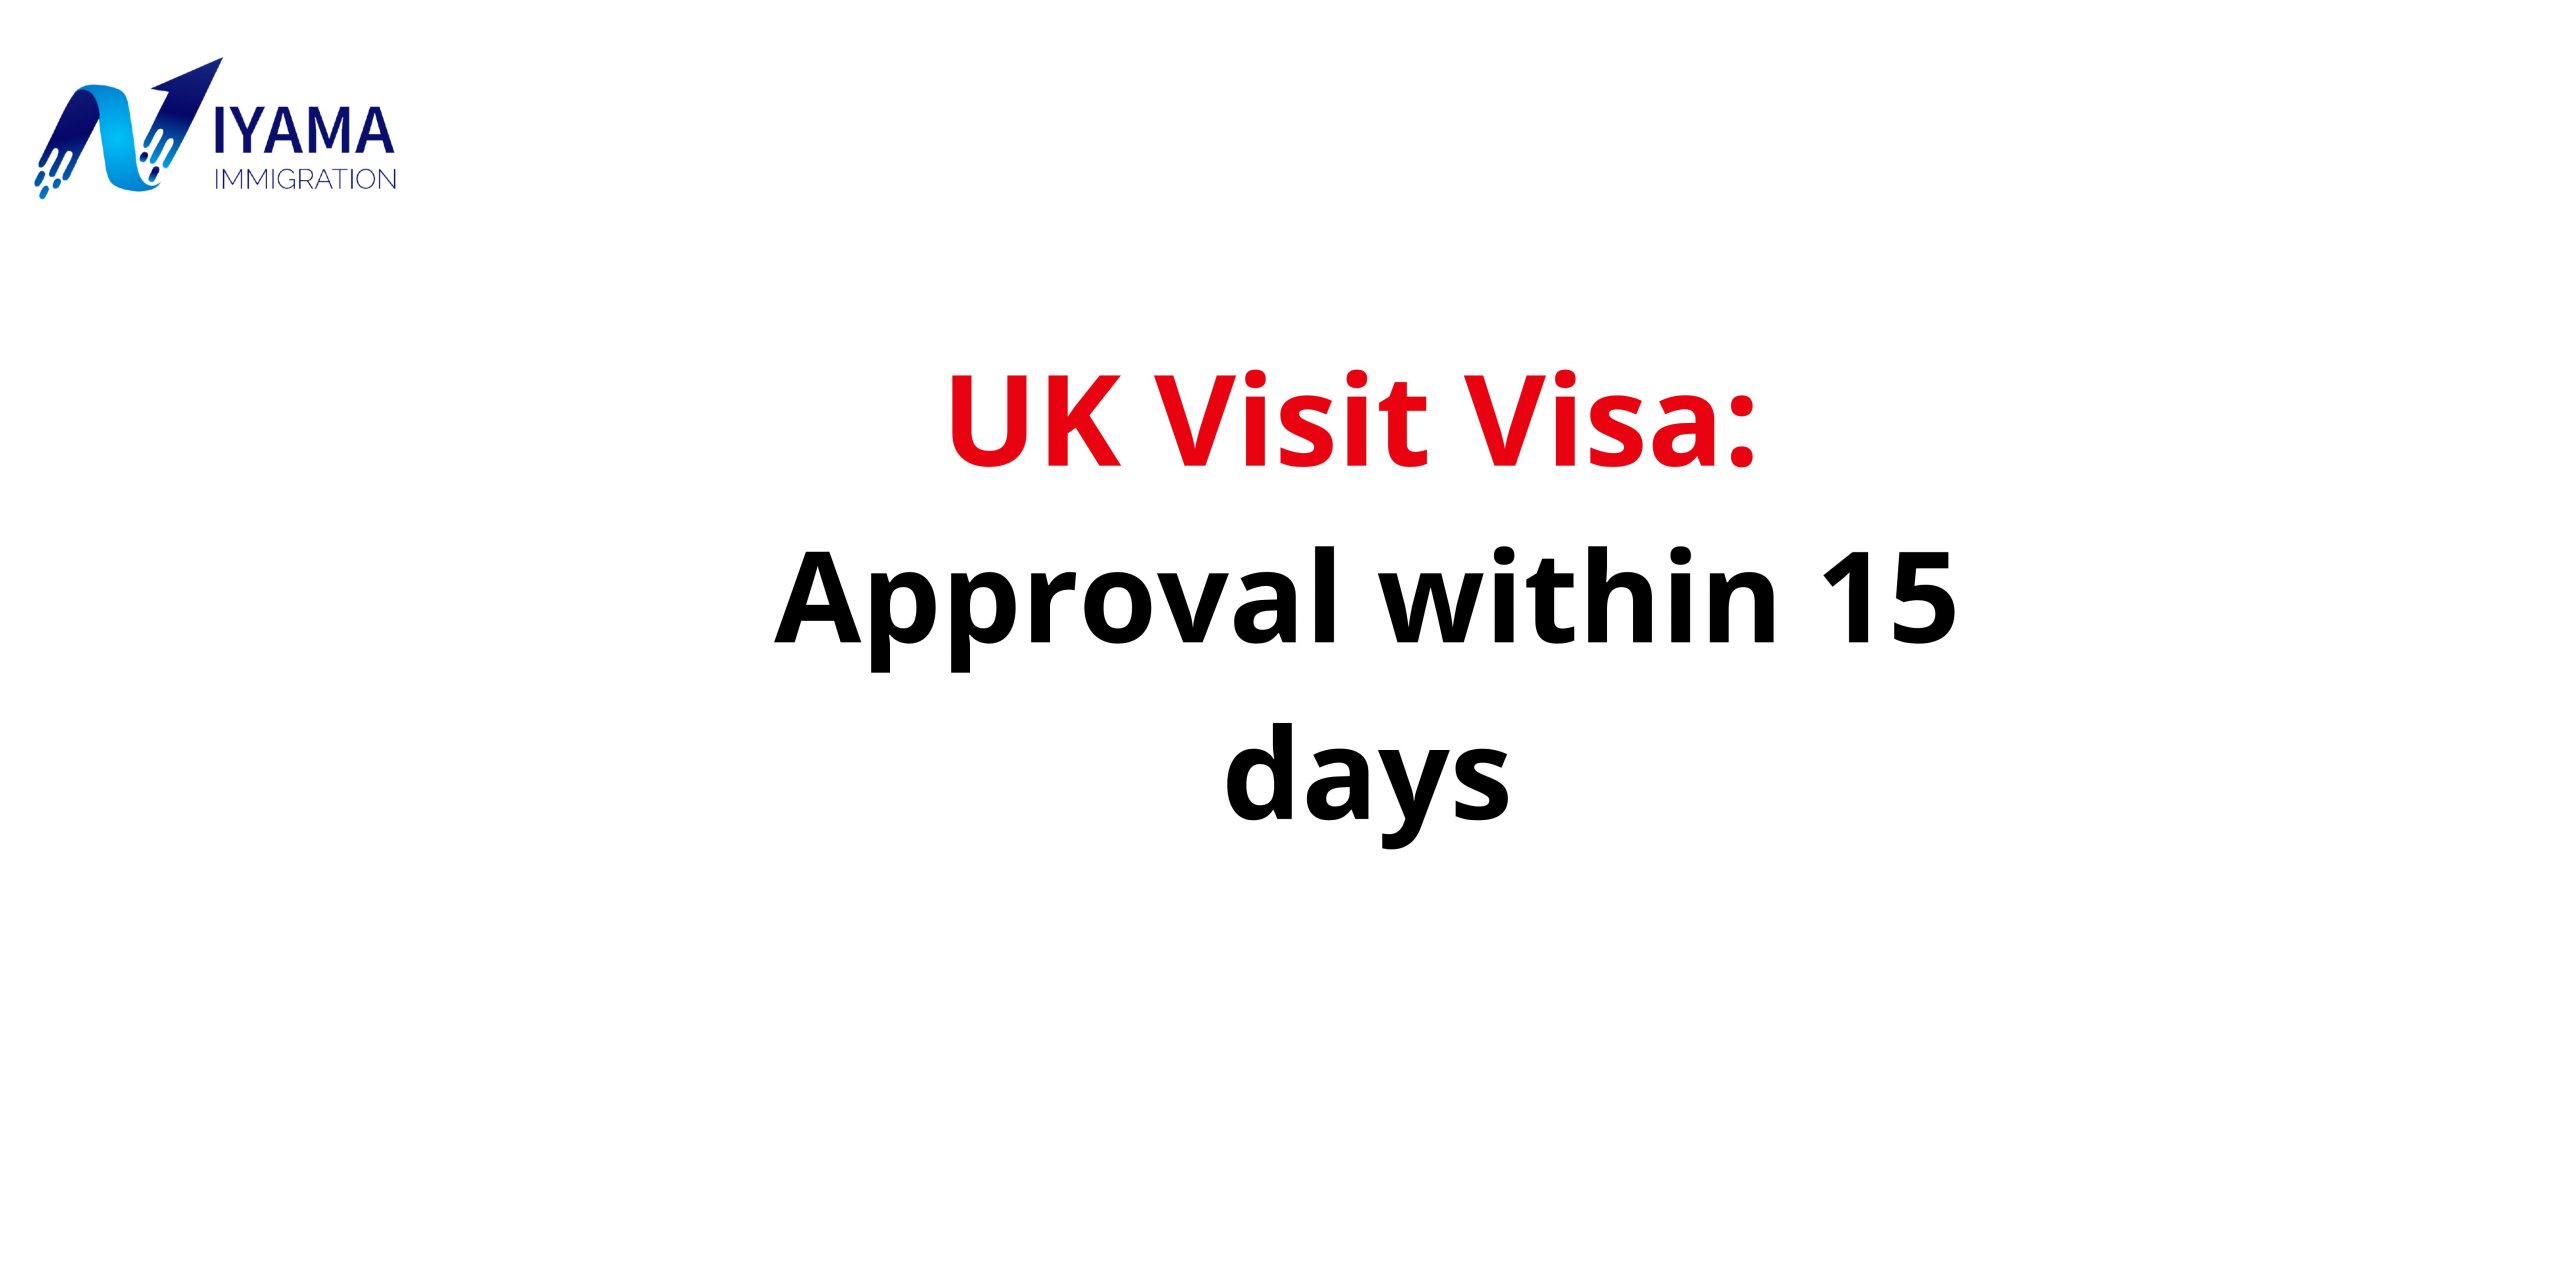 Planning to visit UK? Apply Now & Get visa approval in 15 days